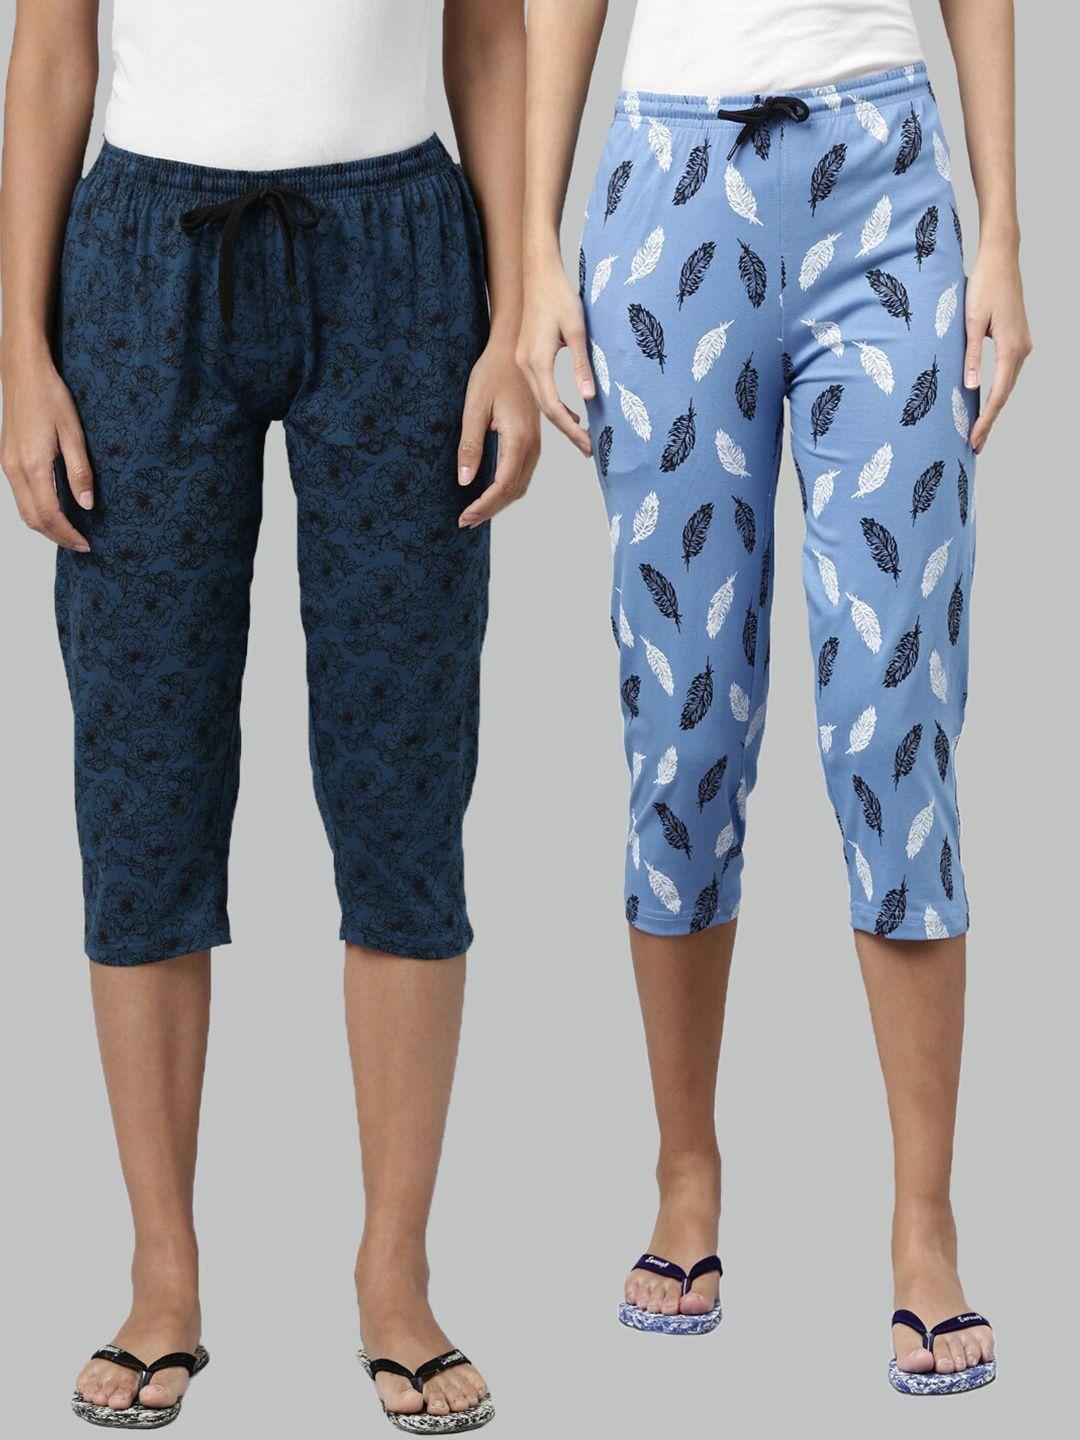 kryptic women pack of 2 navy blue & white printed cotton capris